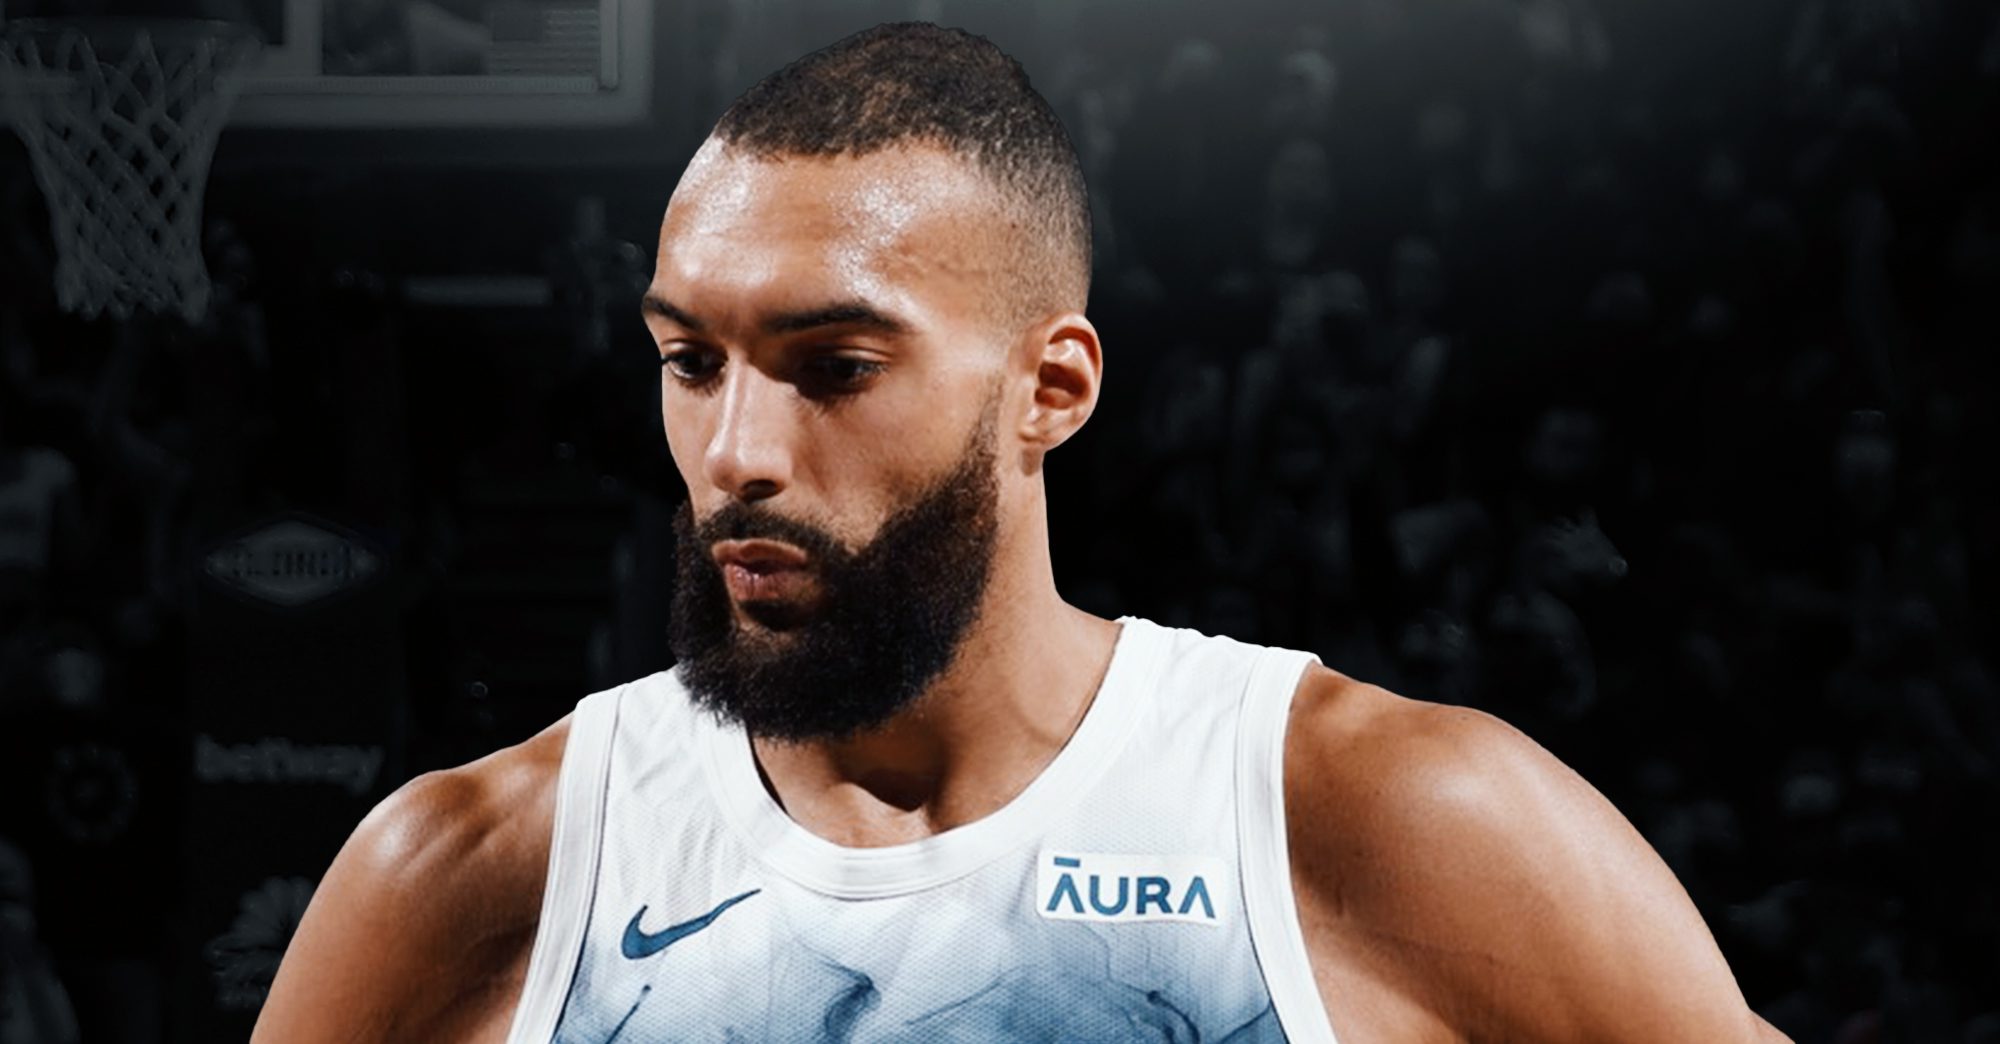 Rudy Gobert Explains Why He Has Beef With So Many Players